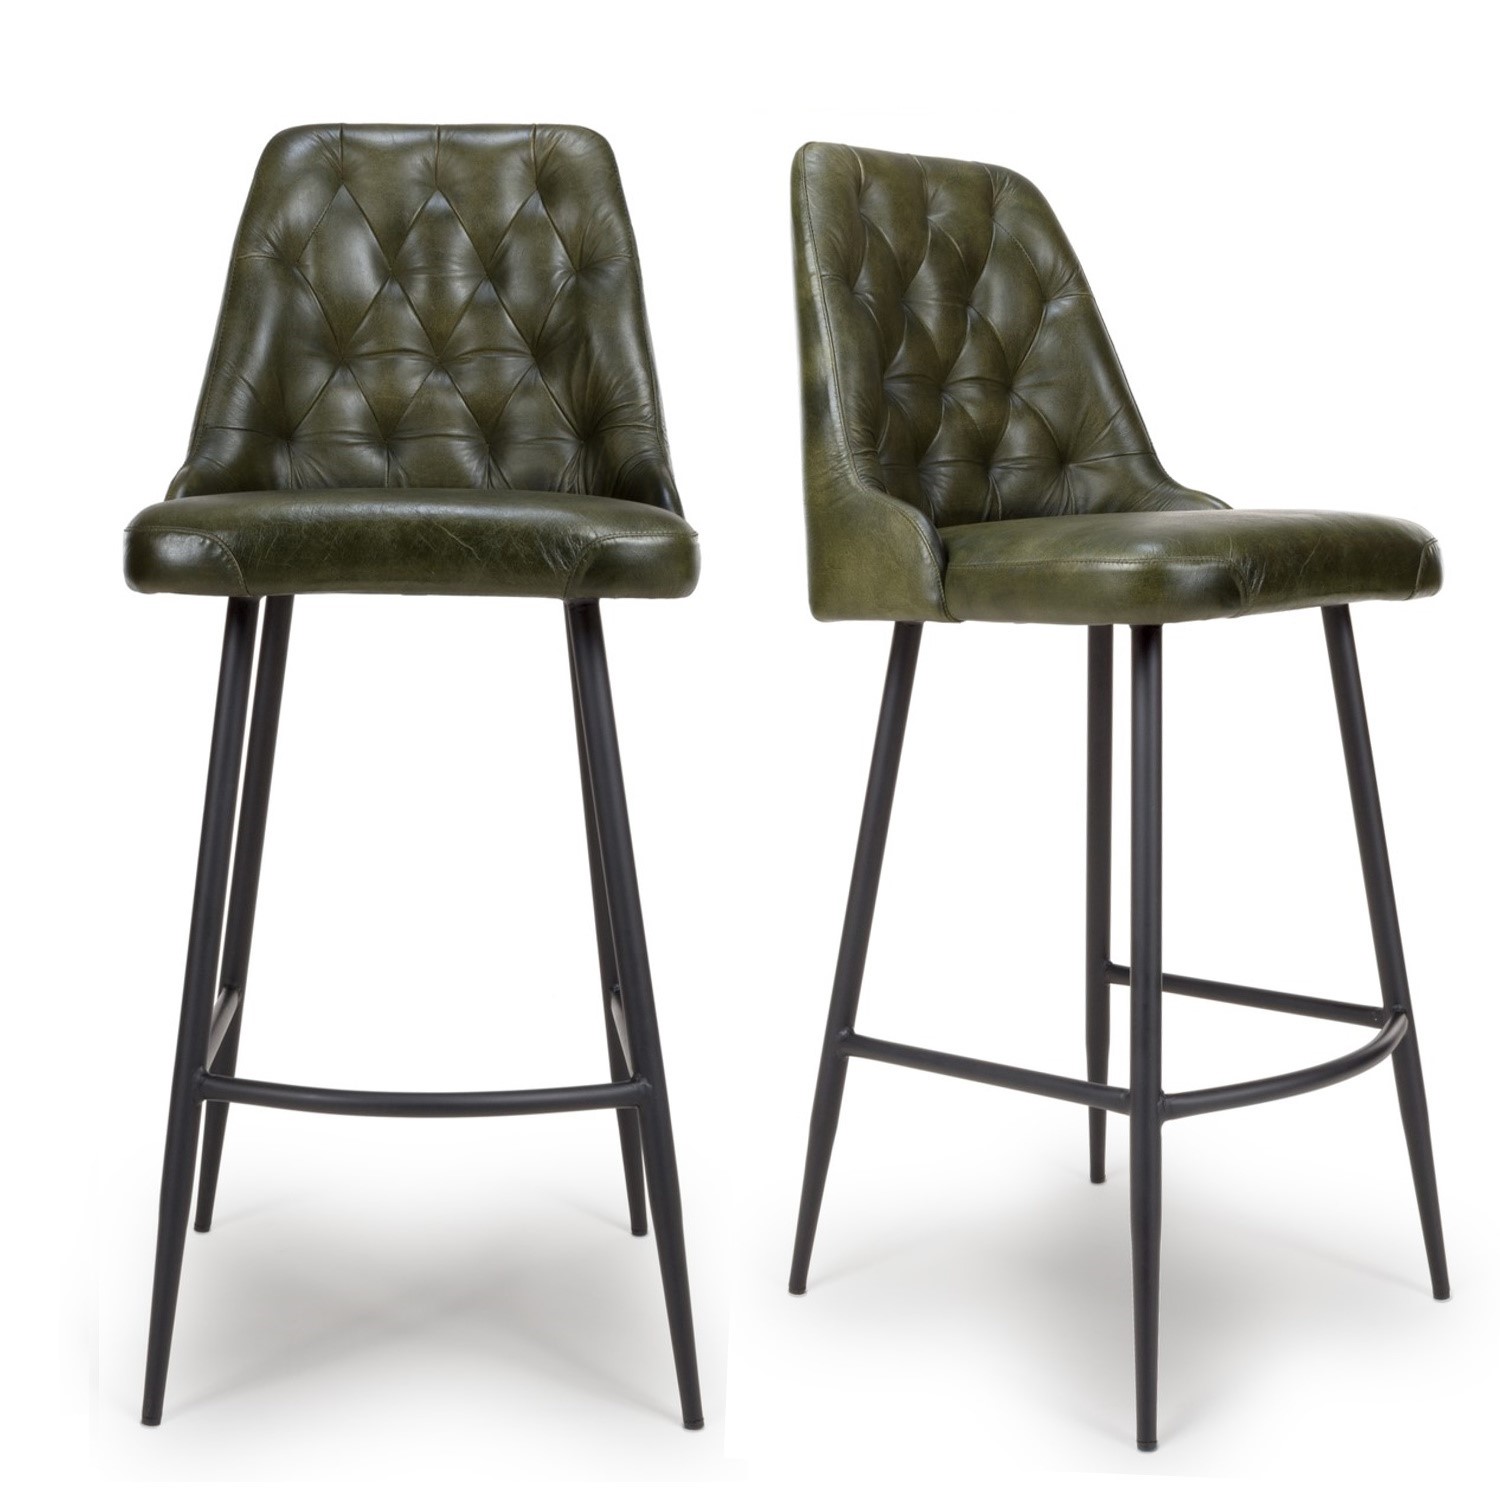 Photo of Set of 2 leather green kitchen stools with quilted back- jaxson